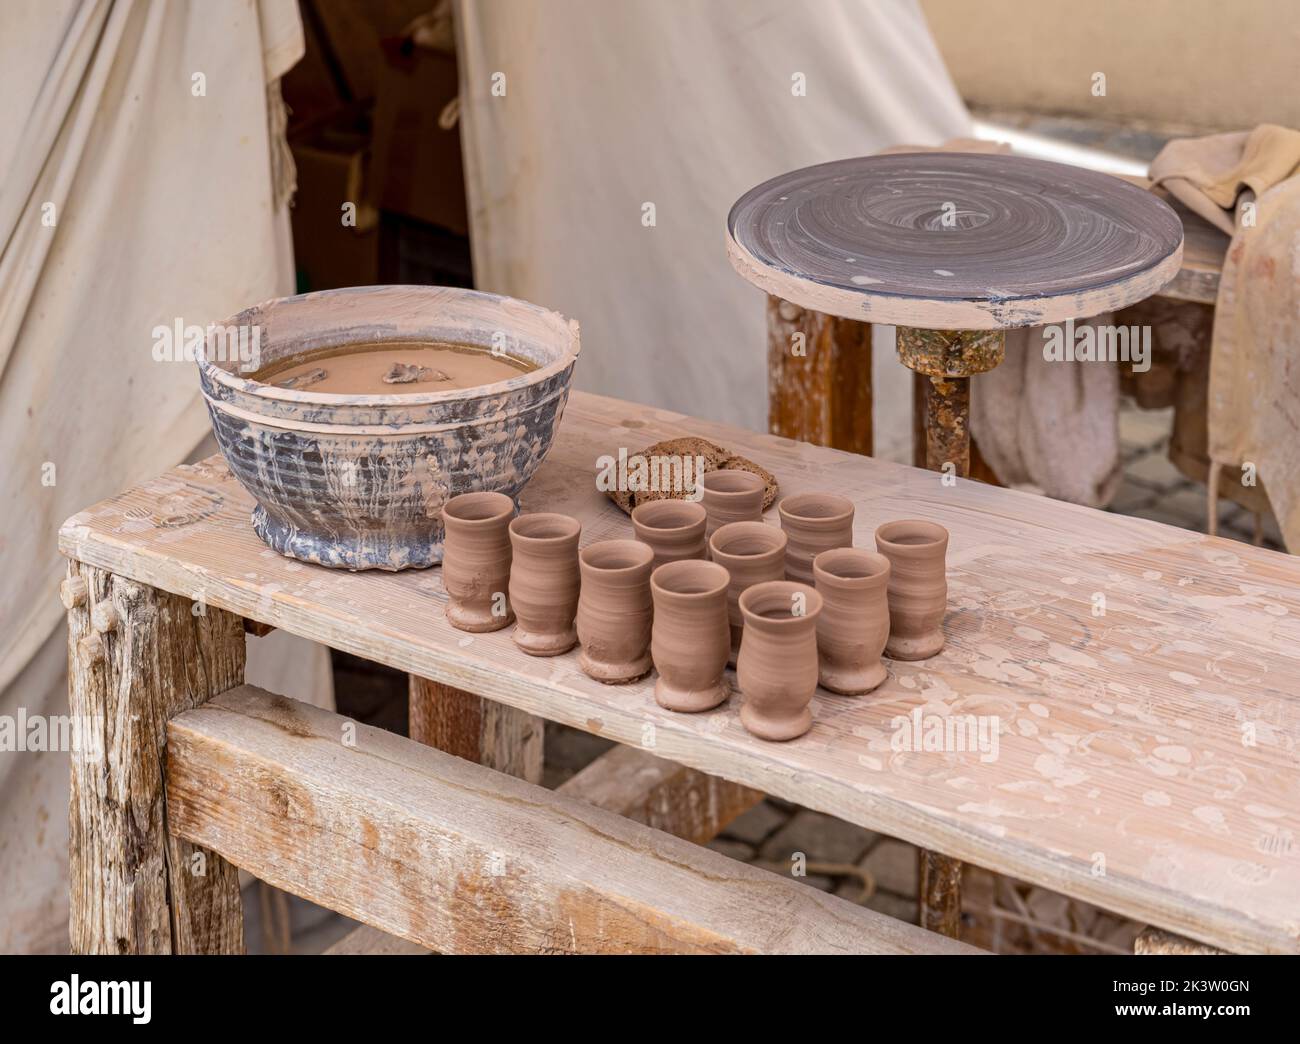 Traditional ceramic manufacturing with throwing table, beakers and bowl on wooden table Stock Photo